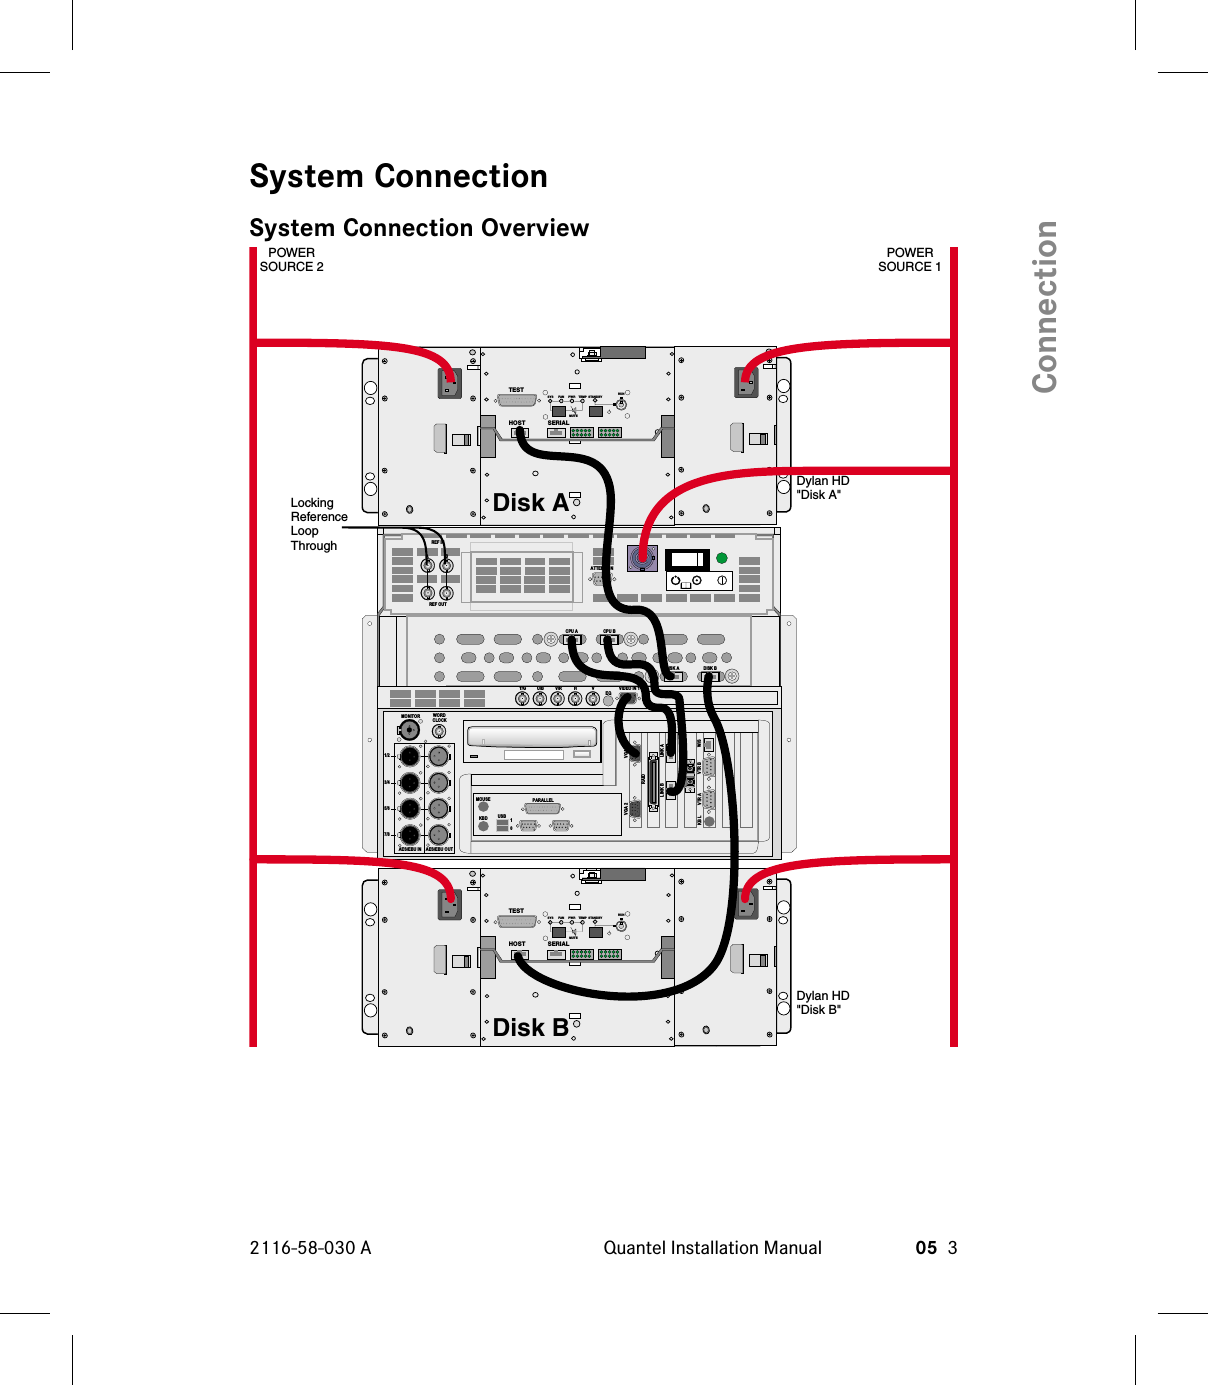 System ConnectionSystem Connection Overview2116-58-030 A Quantel Installation Manual 05 3ConnectionHD INSD INHD OUTSD OUTHD OUTSD OUTSD INHD INDISK A DISK BCPU A CPU BATTENTIONAREF INBREF OUTTXRXVGA 1LINK ARAIDW/SVGA 2LINK BVTR BVTR AKB LMOUSEWORDKBD USB10PARALLELCLOCKMONITORAES/EBU OUTAES/EBU IN1/23/45/67/8VIDEO IN 1Y/G U/B V/R HVEQTESTHOST SERIALSYS FANRUNPWRMUTETEMP STANDBYTESTHOST SERIALSYS FANRUNPWRMUTETEMP STANDBYDylan HD&quot;Disk A&quot;Disk ADylan HD&quot;Disk B&quot;POWERSOURCE 2POWERSOURCE 1LockingReferenceLoopThroughDisk B